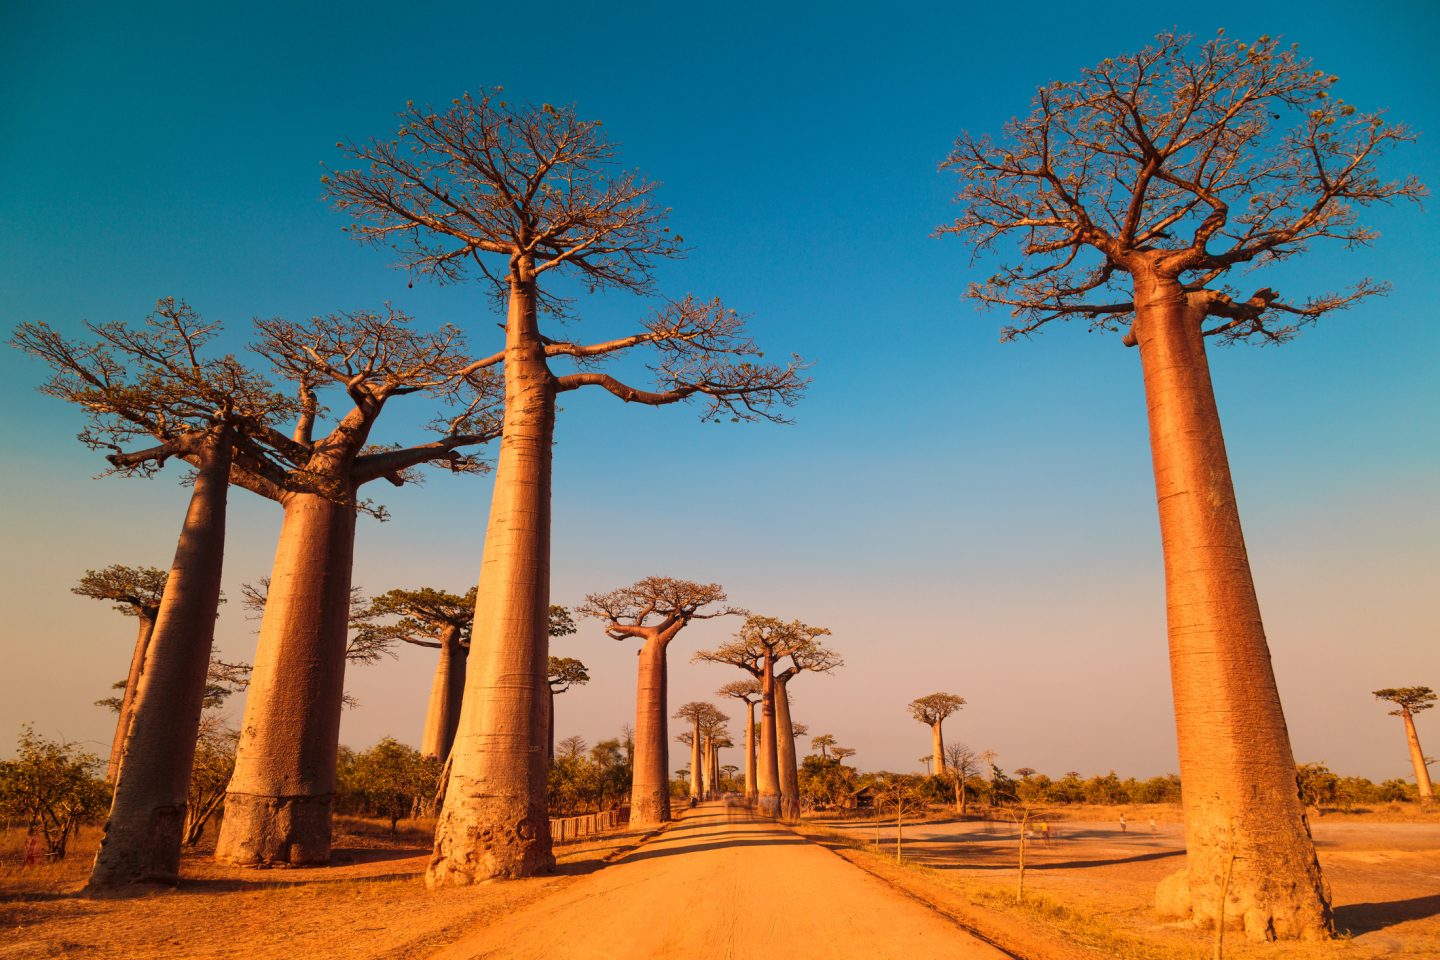 baobab trees have started dying.